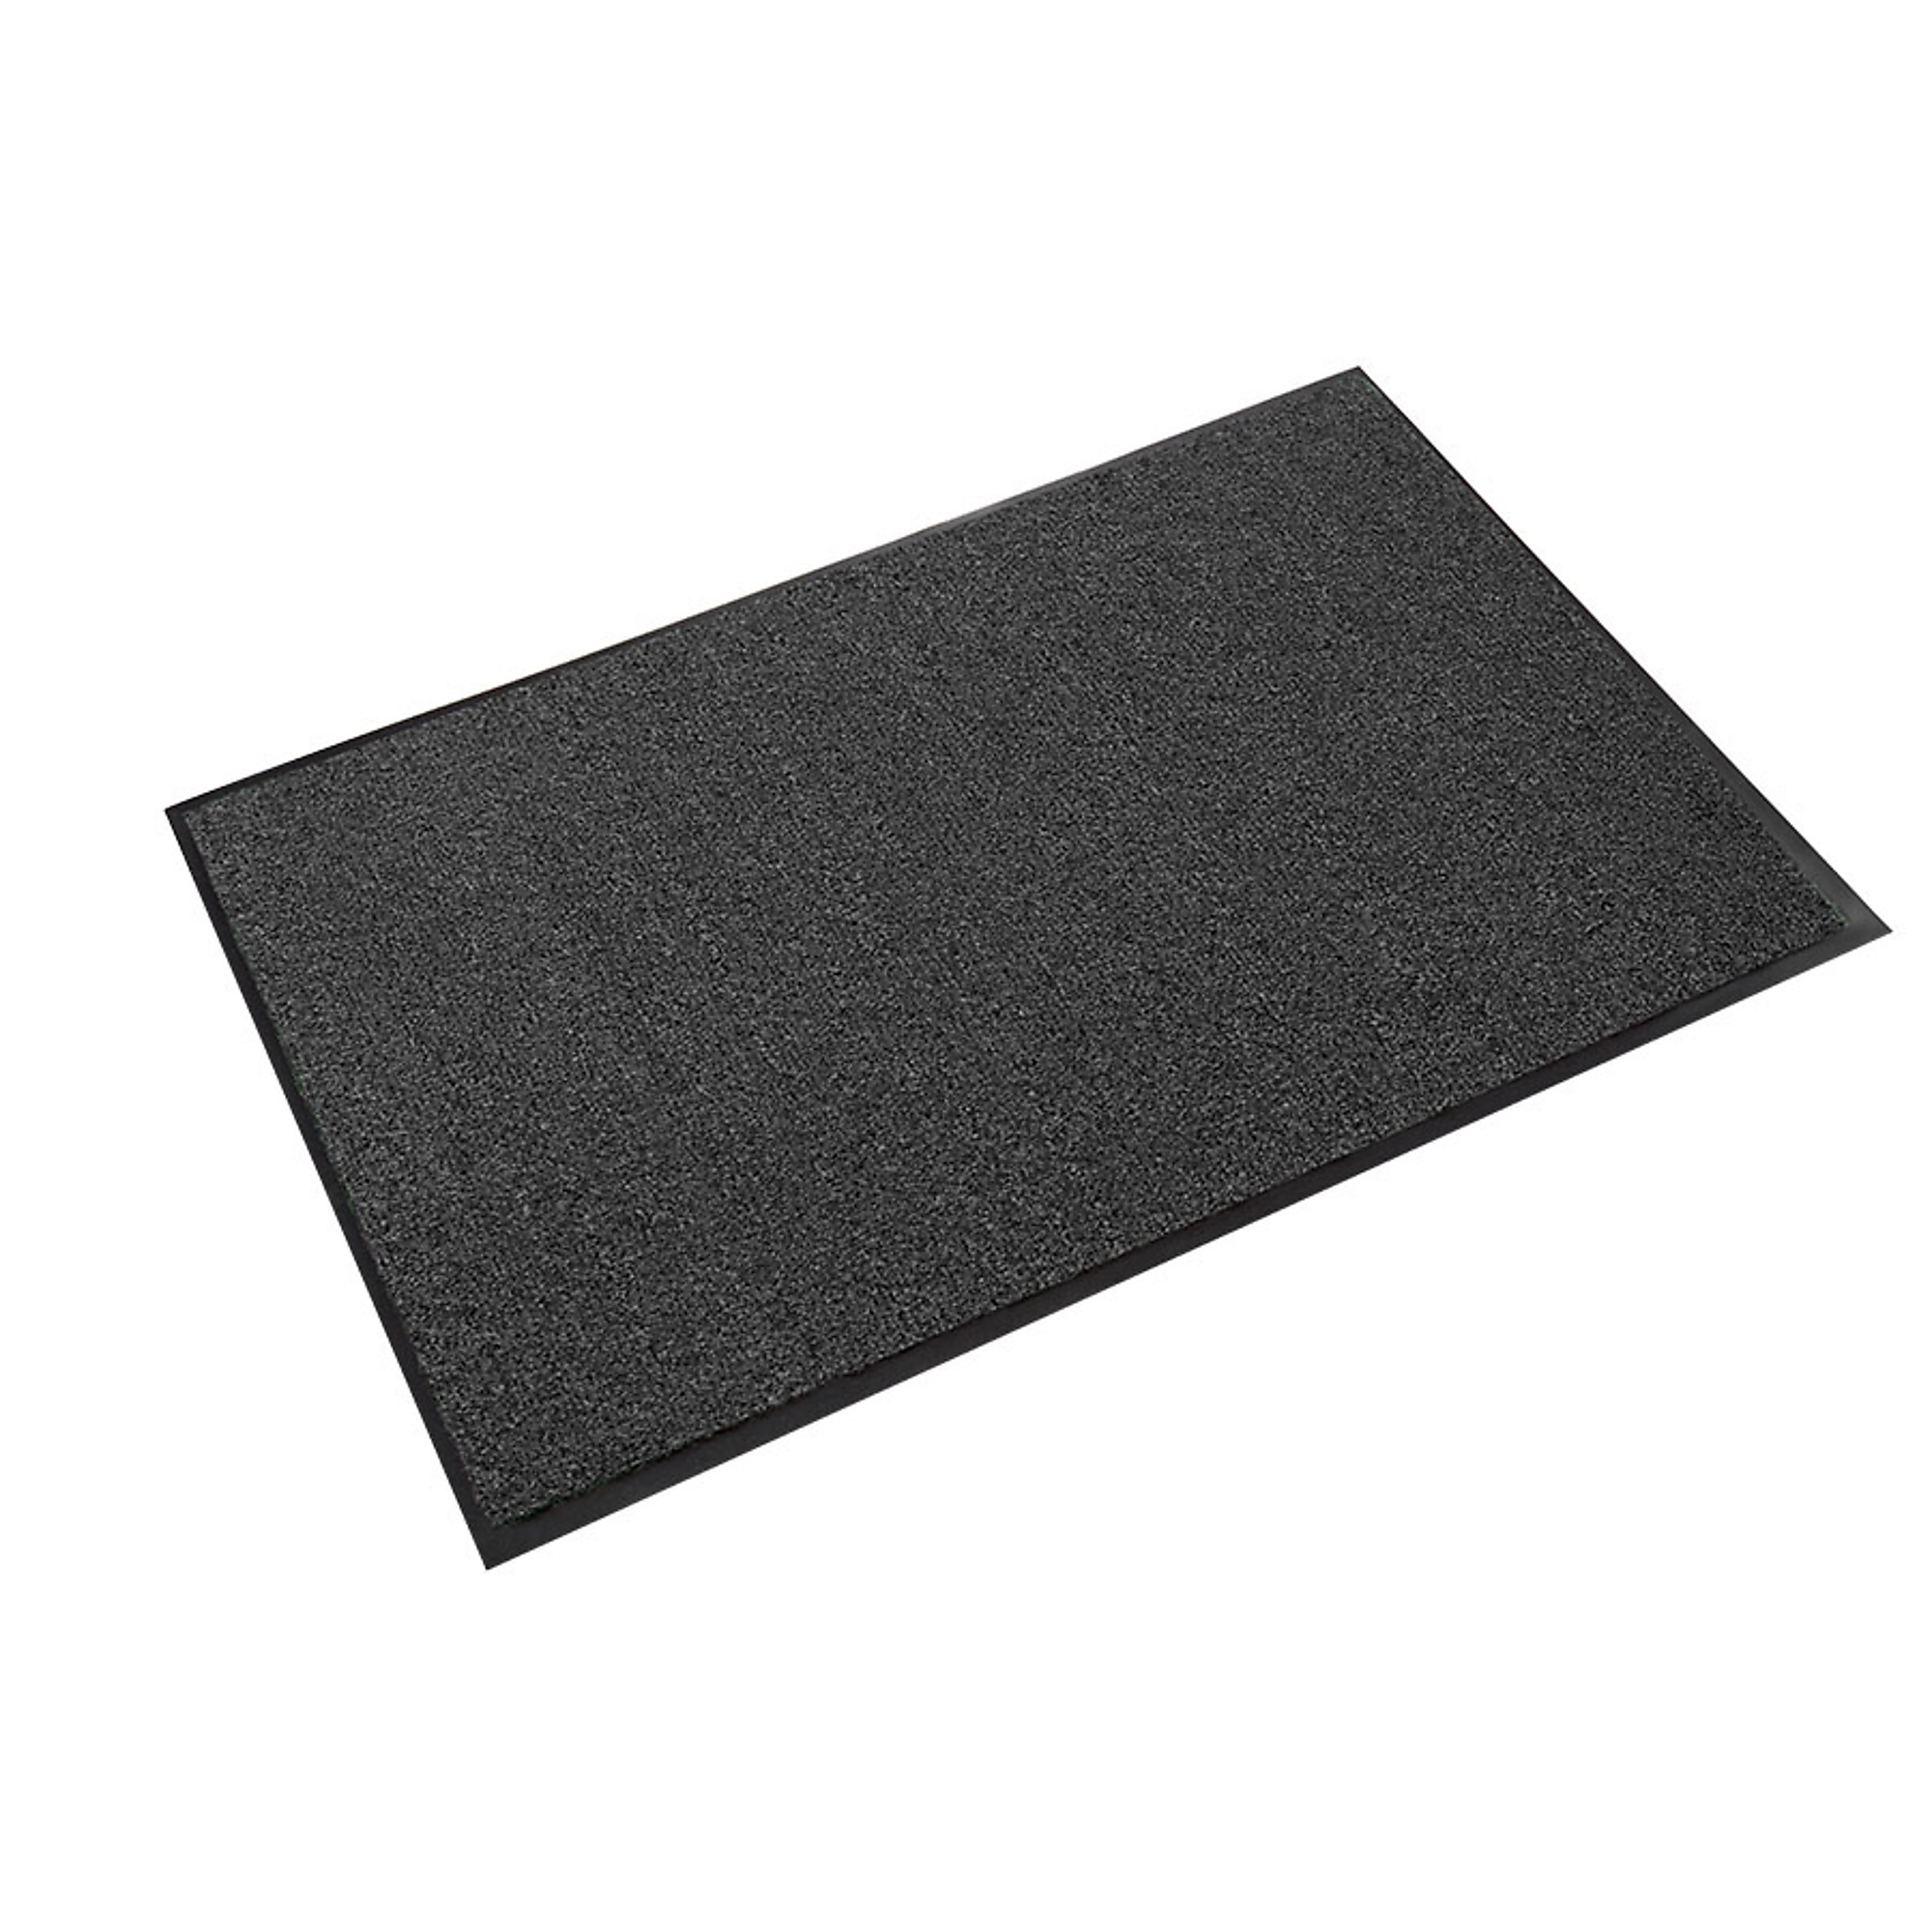 Crown Matting Technologies, Wonder-Pro 2ft.x3ft. Charcoal, Width 24 in, Length 36 in, Thickness 7/16 in, Model WP 0023CH